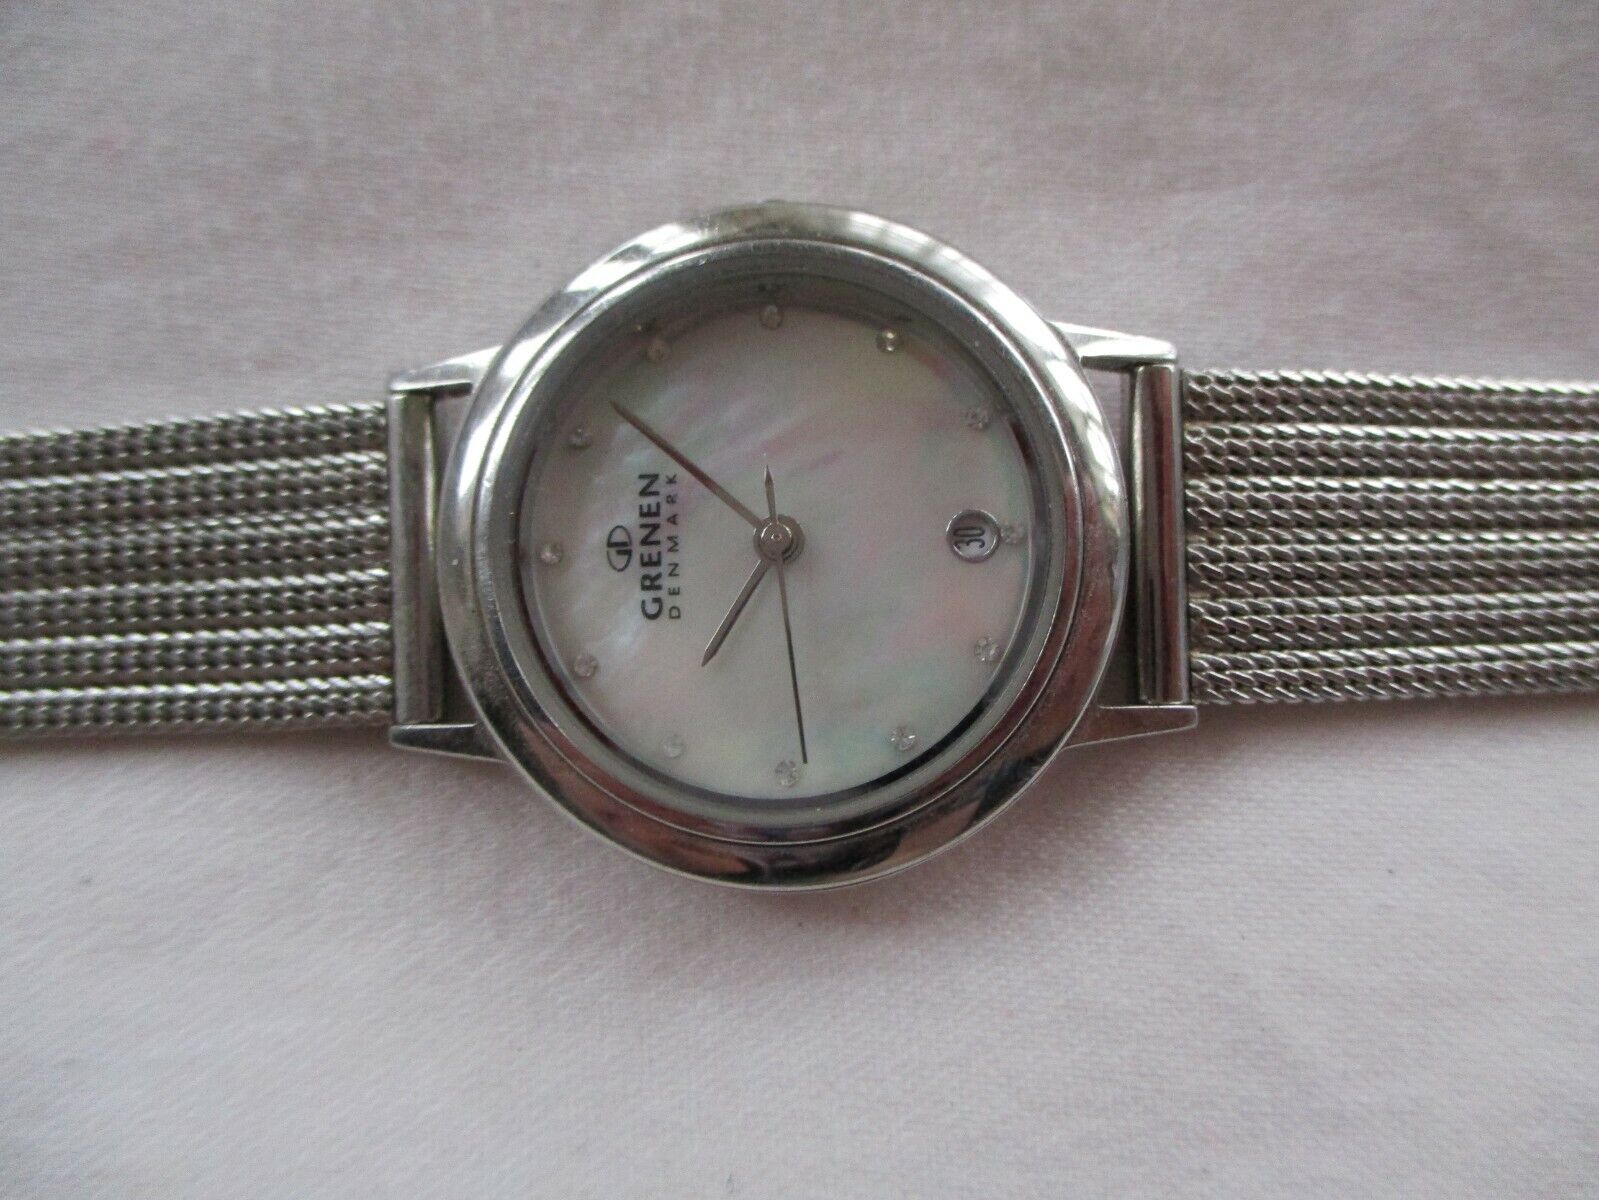 Grenen Analog Wristwatch with a Date Indicator and Water Resistance